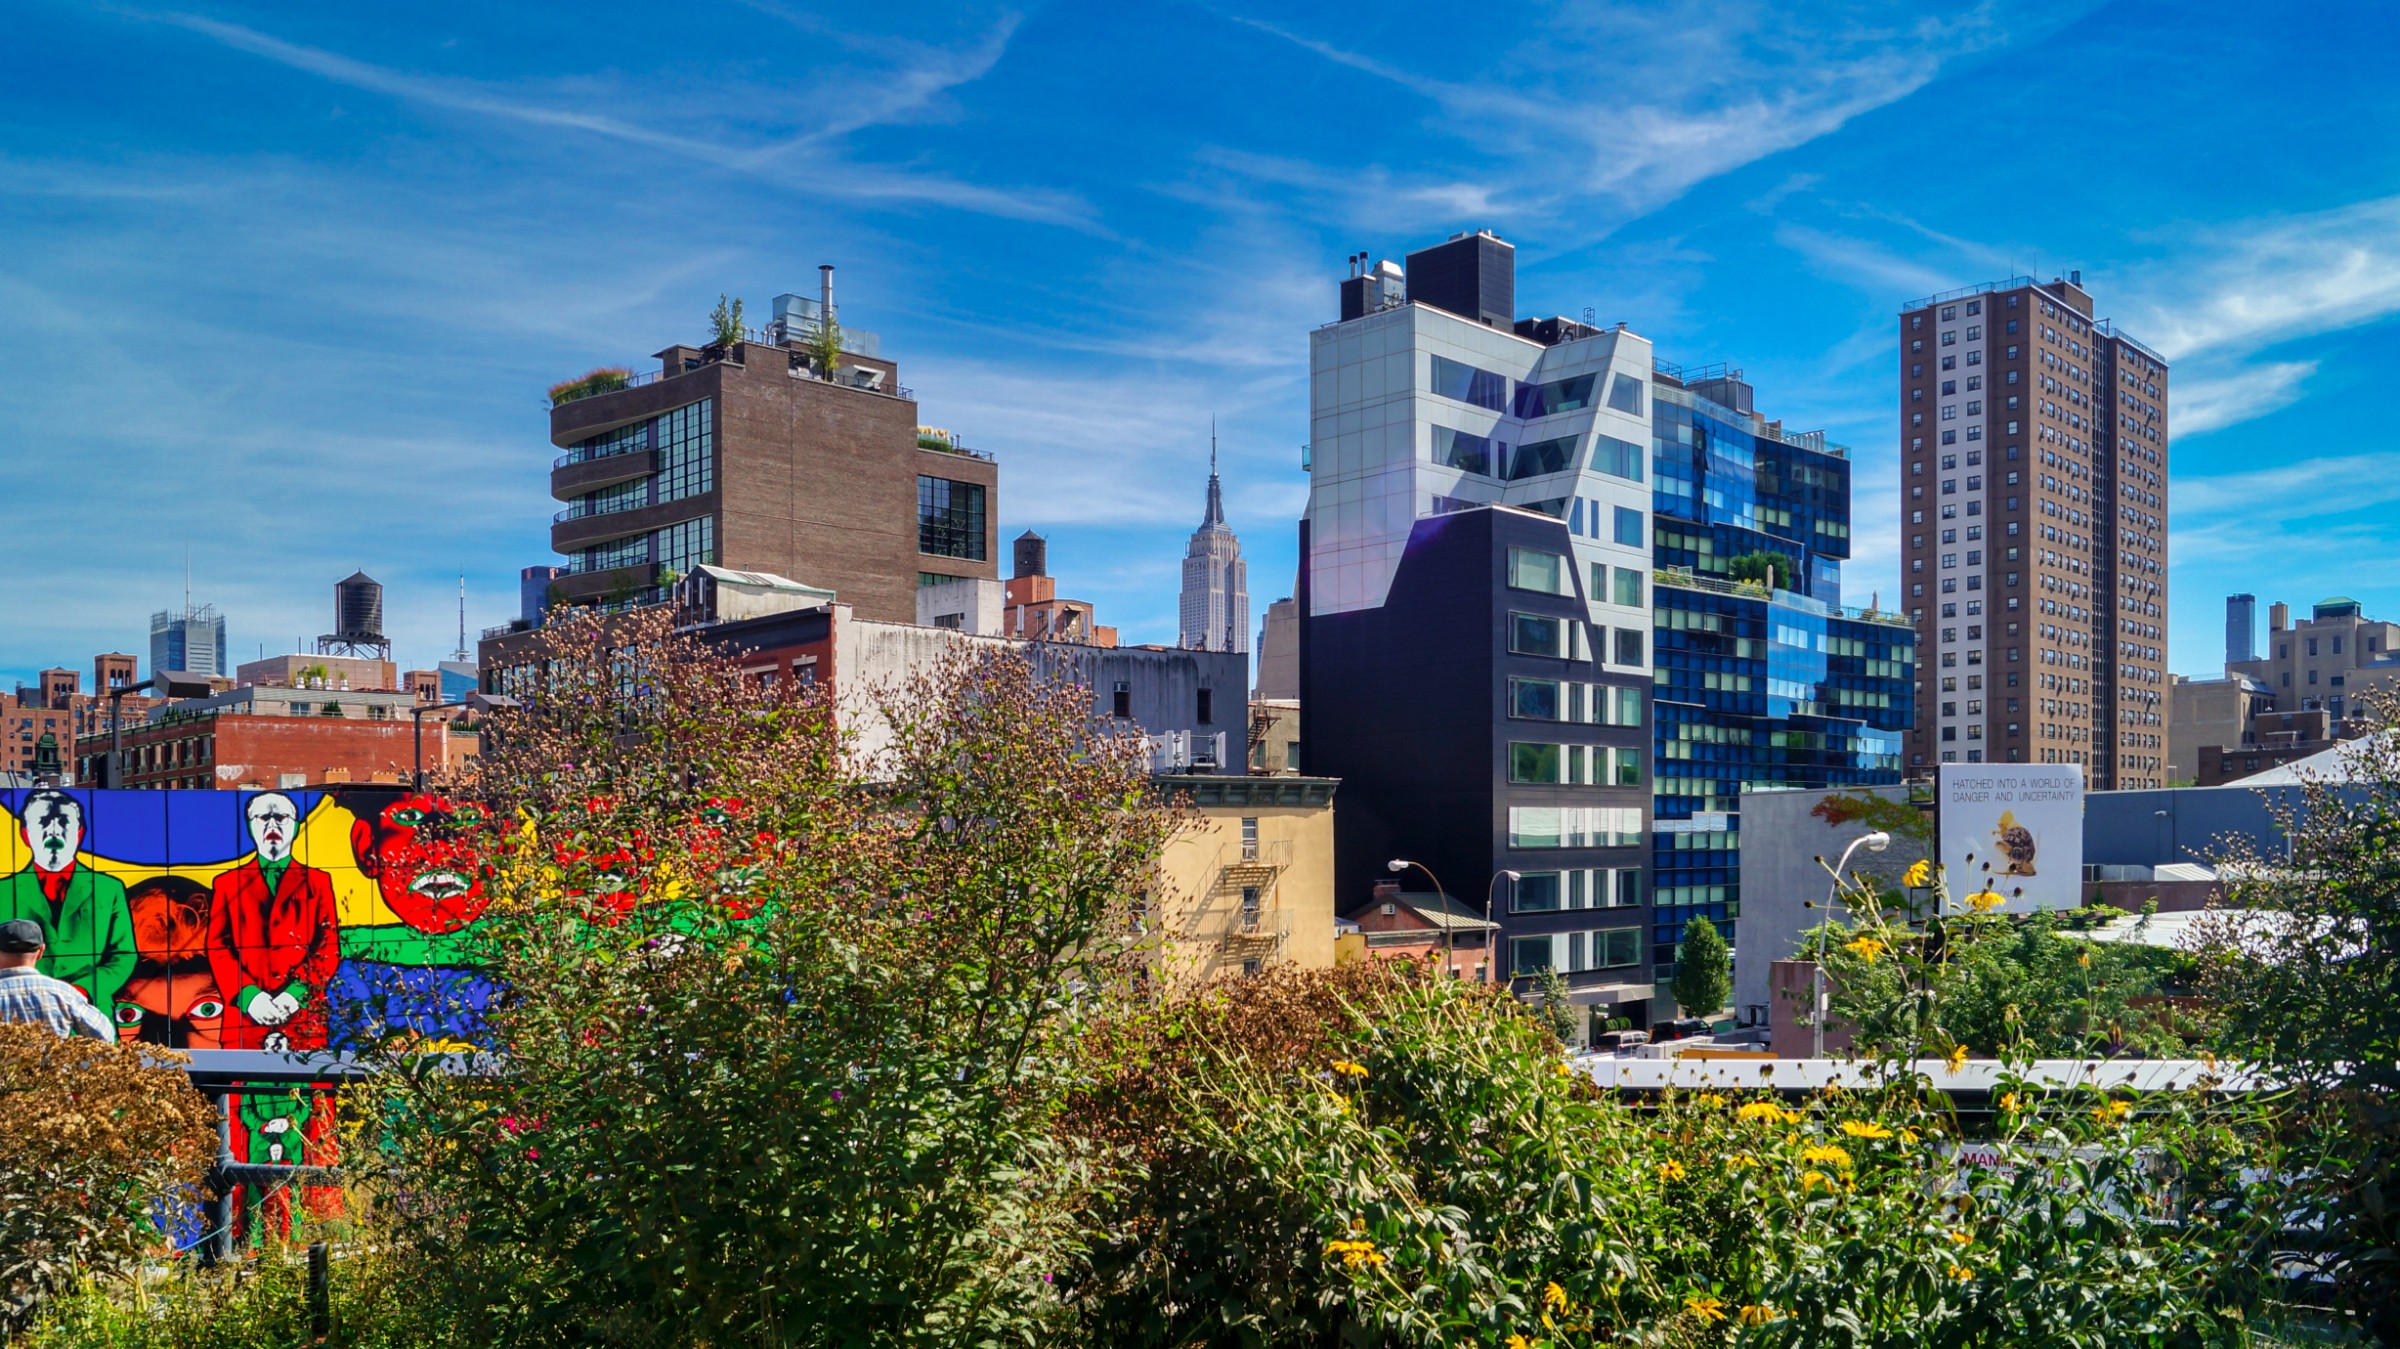 The High Line features many public art displays